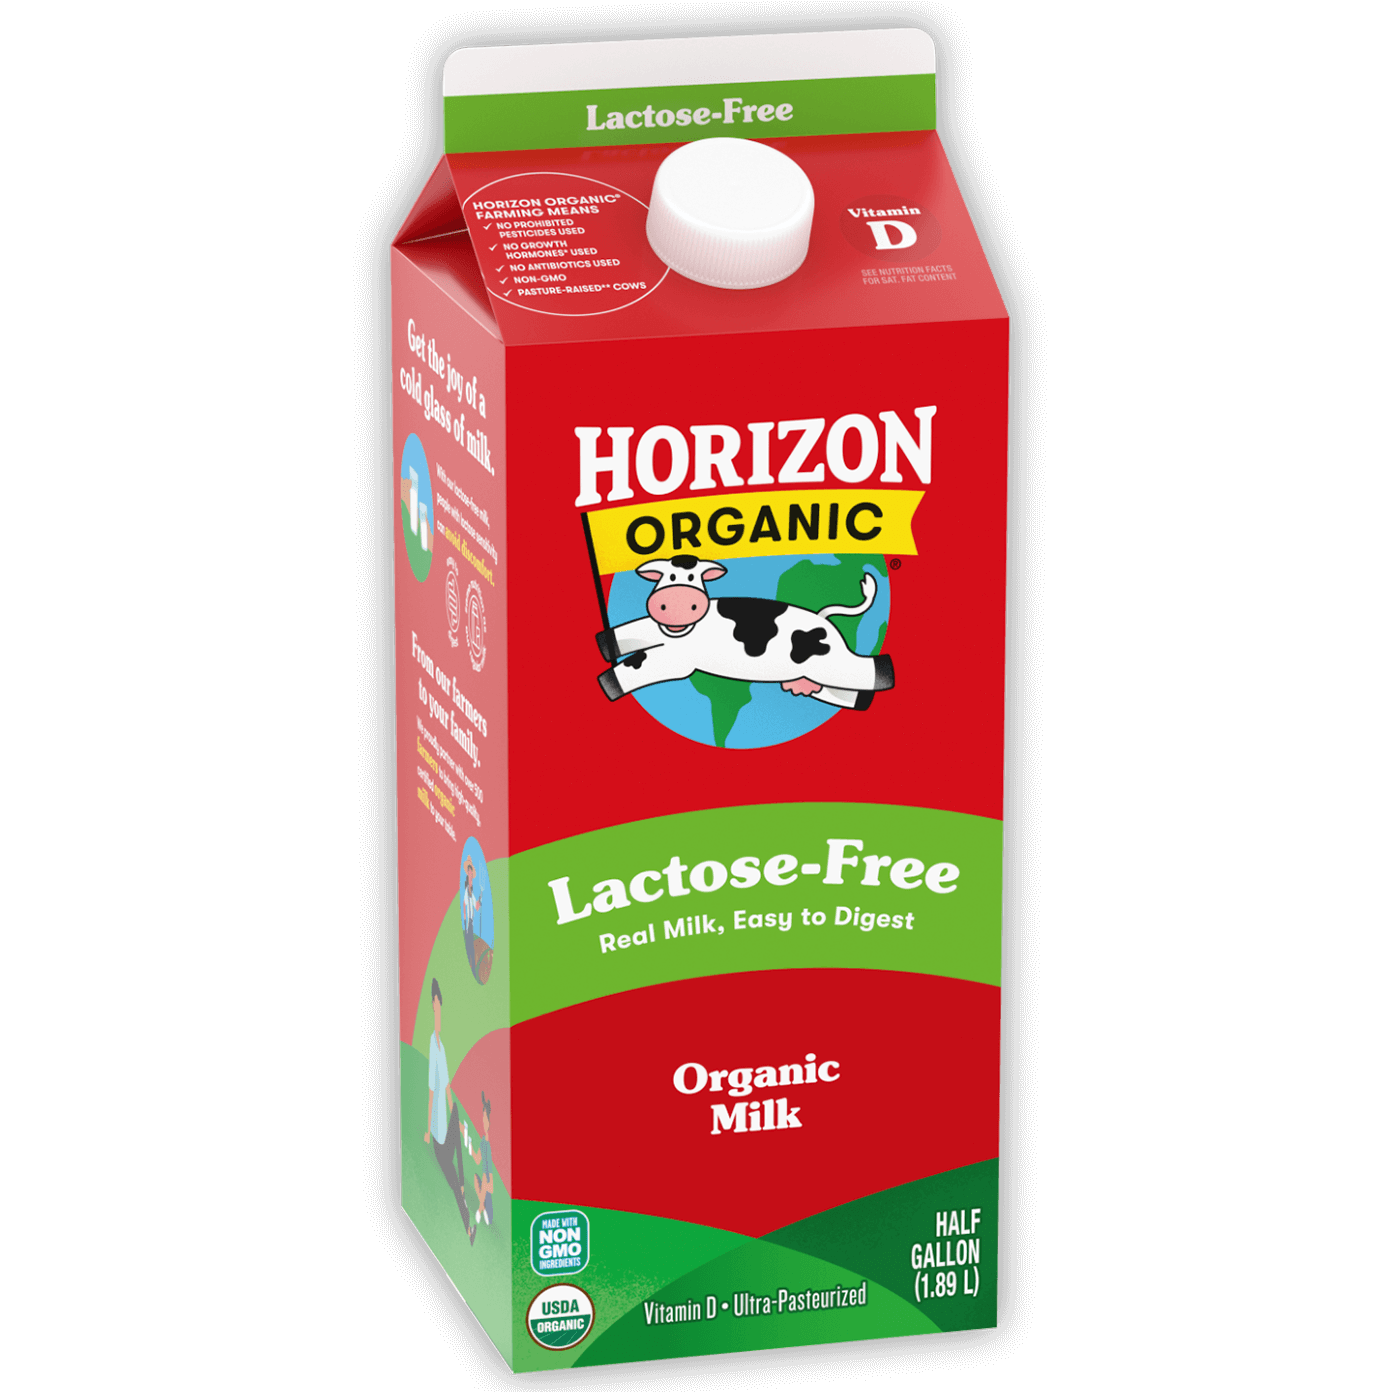 The Truth About Grass-Fed Milk Versus Organic